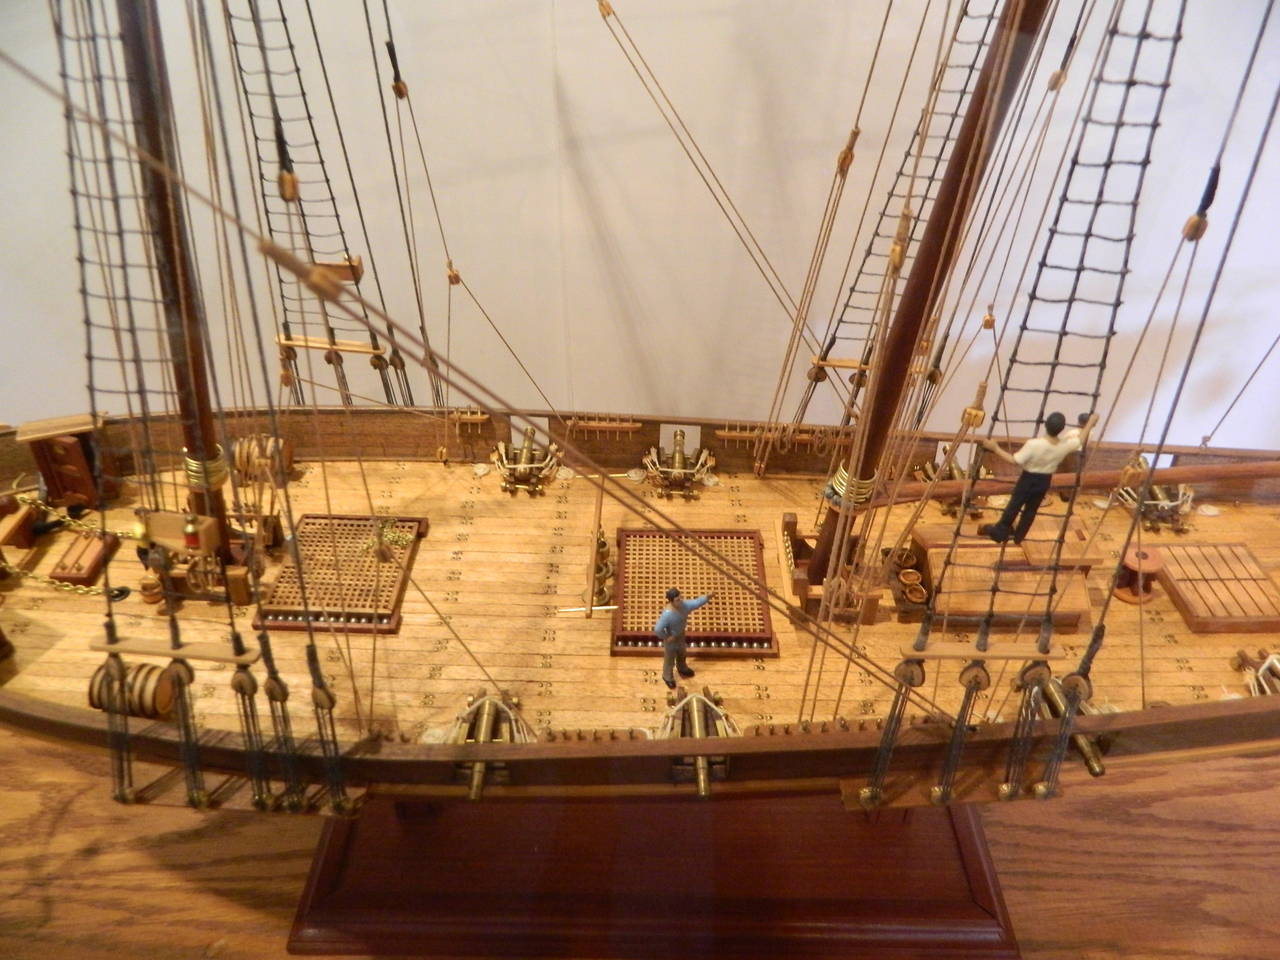 Ship Model of the Harvey, 1847, Baltimore, Maryland in Acrylic Case.  The Harvey was built in 1847 in Baltimore, Maryland. Designed as a Baltimore Clipper, she was a very fast topsail schooner working out of the port of Galveston Texas. At the turn